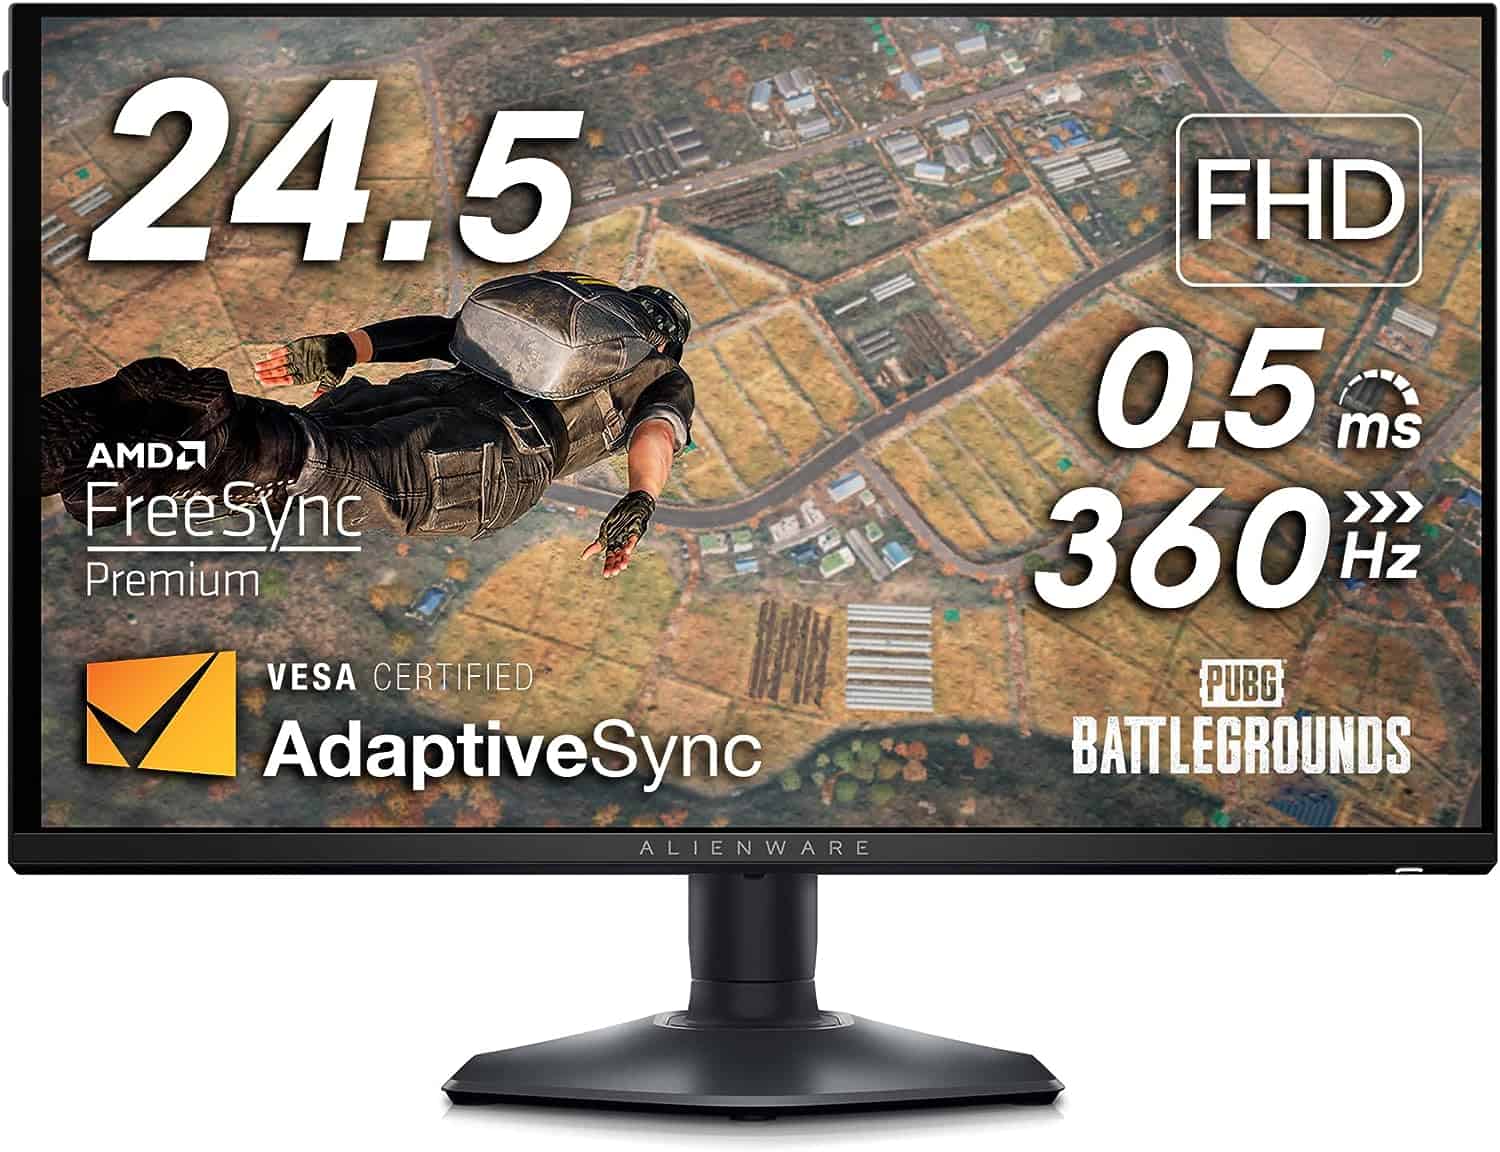 An Alienware AW2523HF gaming monitor with a freesync feature.